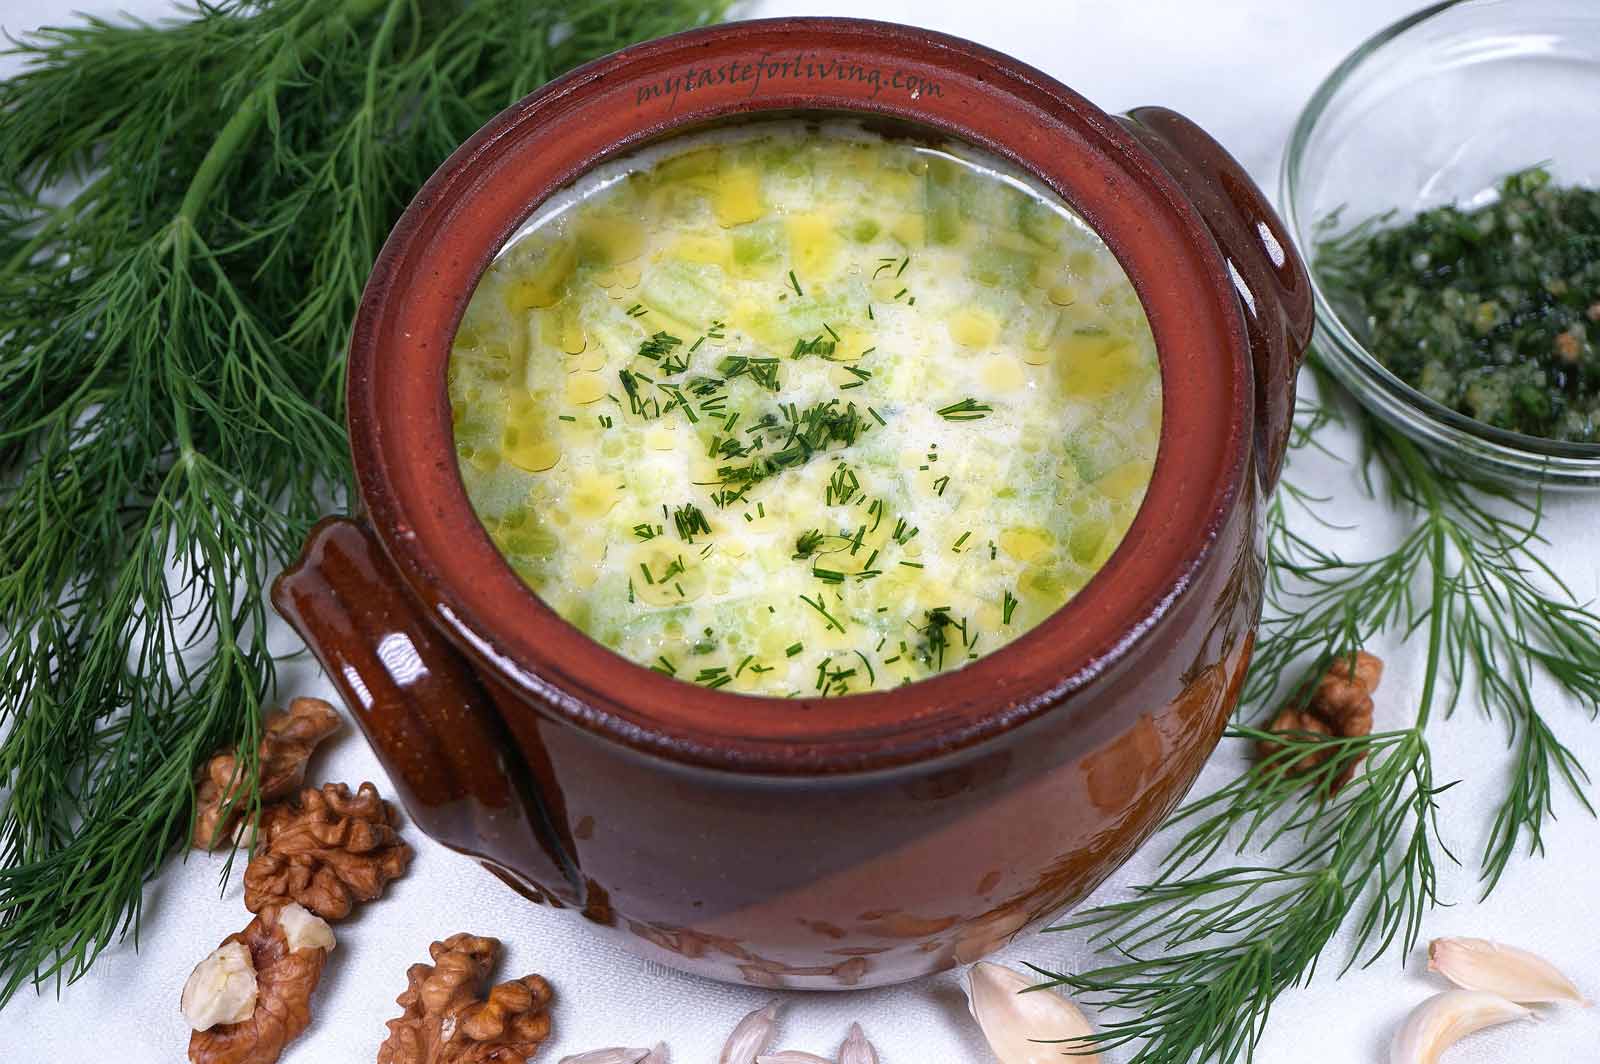 Tarator is a traditional Bulgarian cold cucumber soup made with yogurt and cucumbers. It may sound strange, but there is an easy and tasty way to prepare it in a vegan version. Instead of yogurt, you need raw sunflower seeds and water, the rest is well known. 